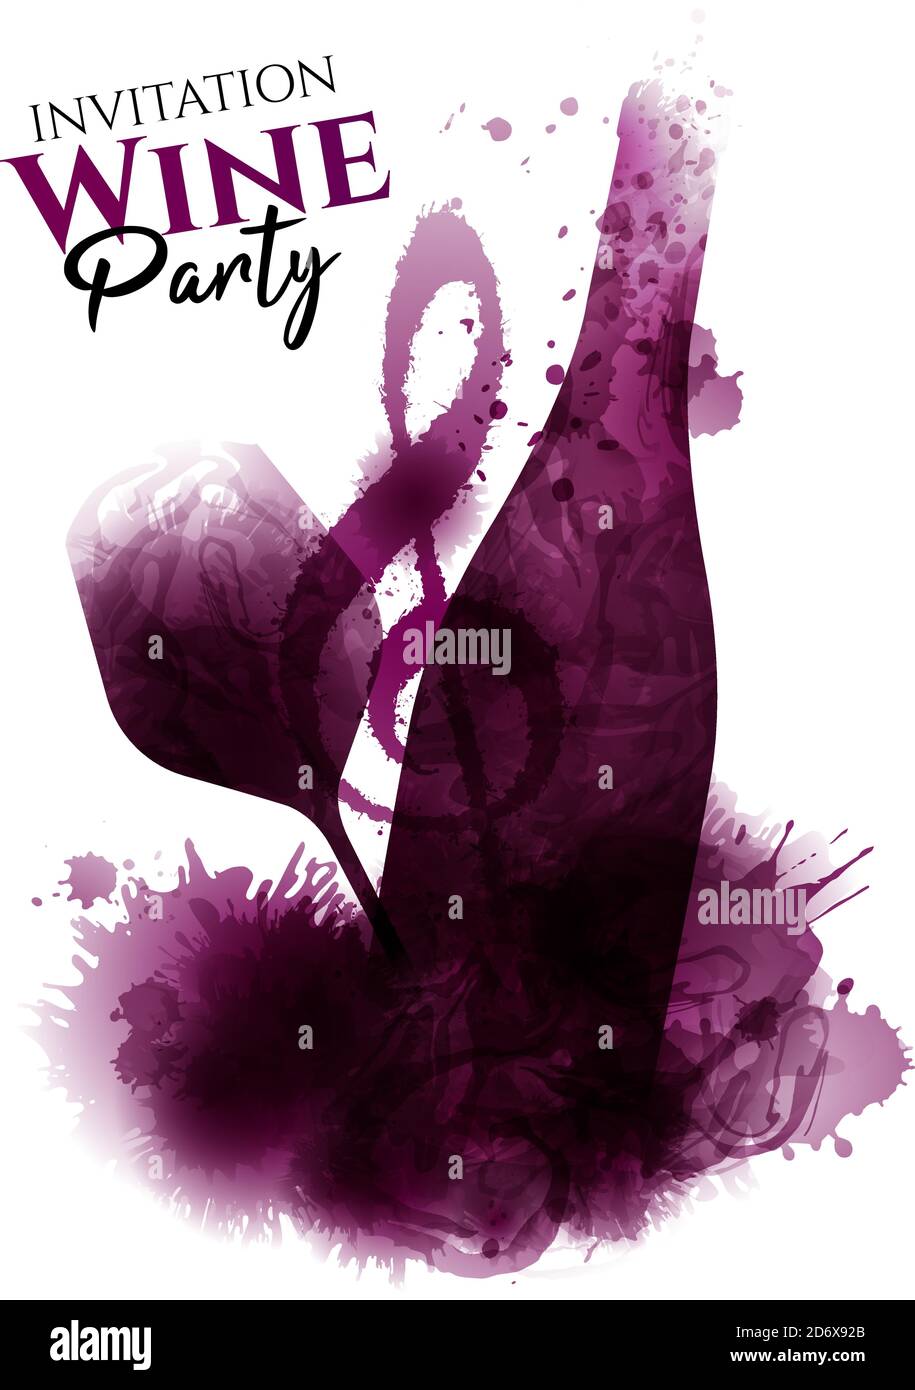 Wine bottle illustration, wine glass and music symbol. Artistic illustration with red wine stains in the background. Poster, cover, ad, flyer, present Stock Vector